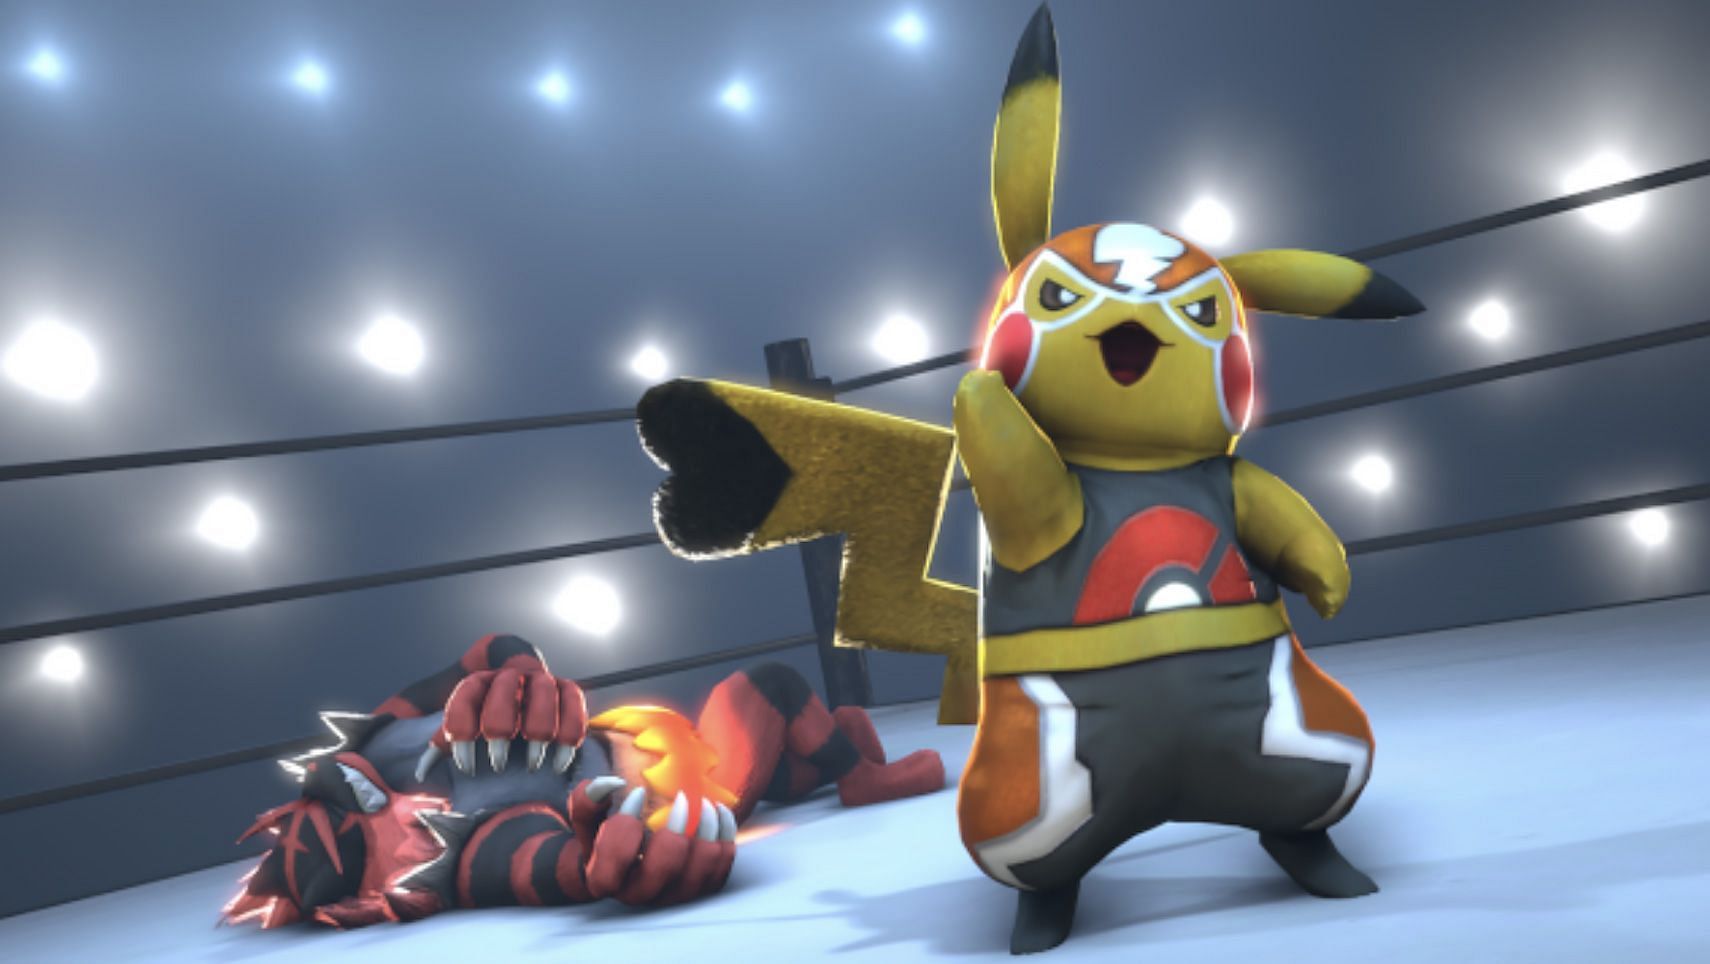 Pikachu Libre is one of many Pikachu variants in the game (Image via Game Freak)